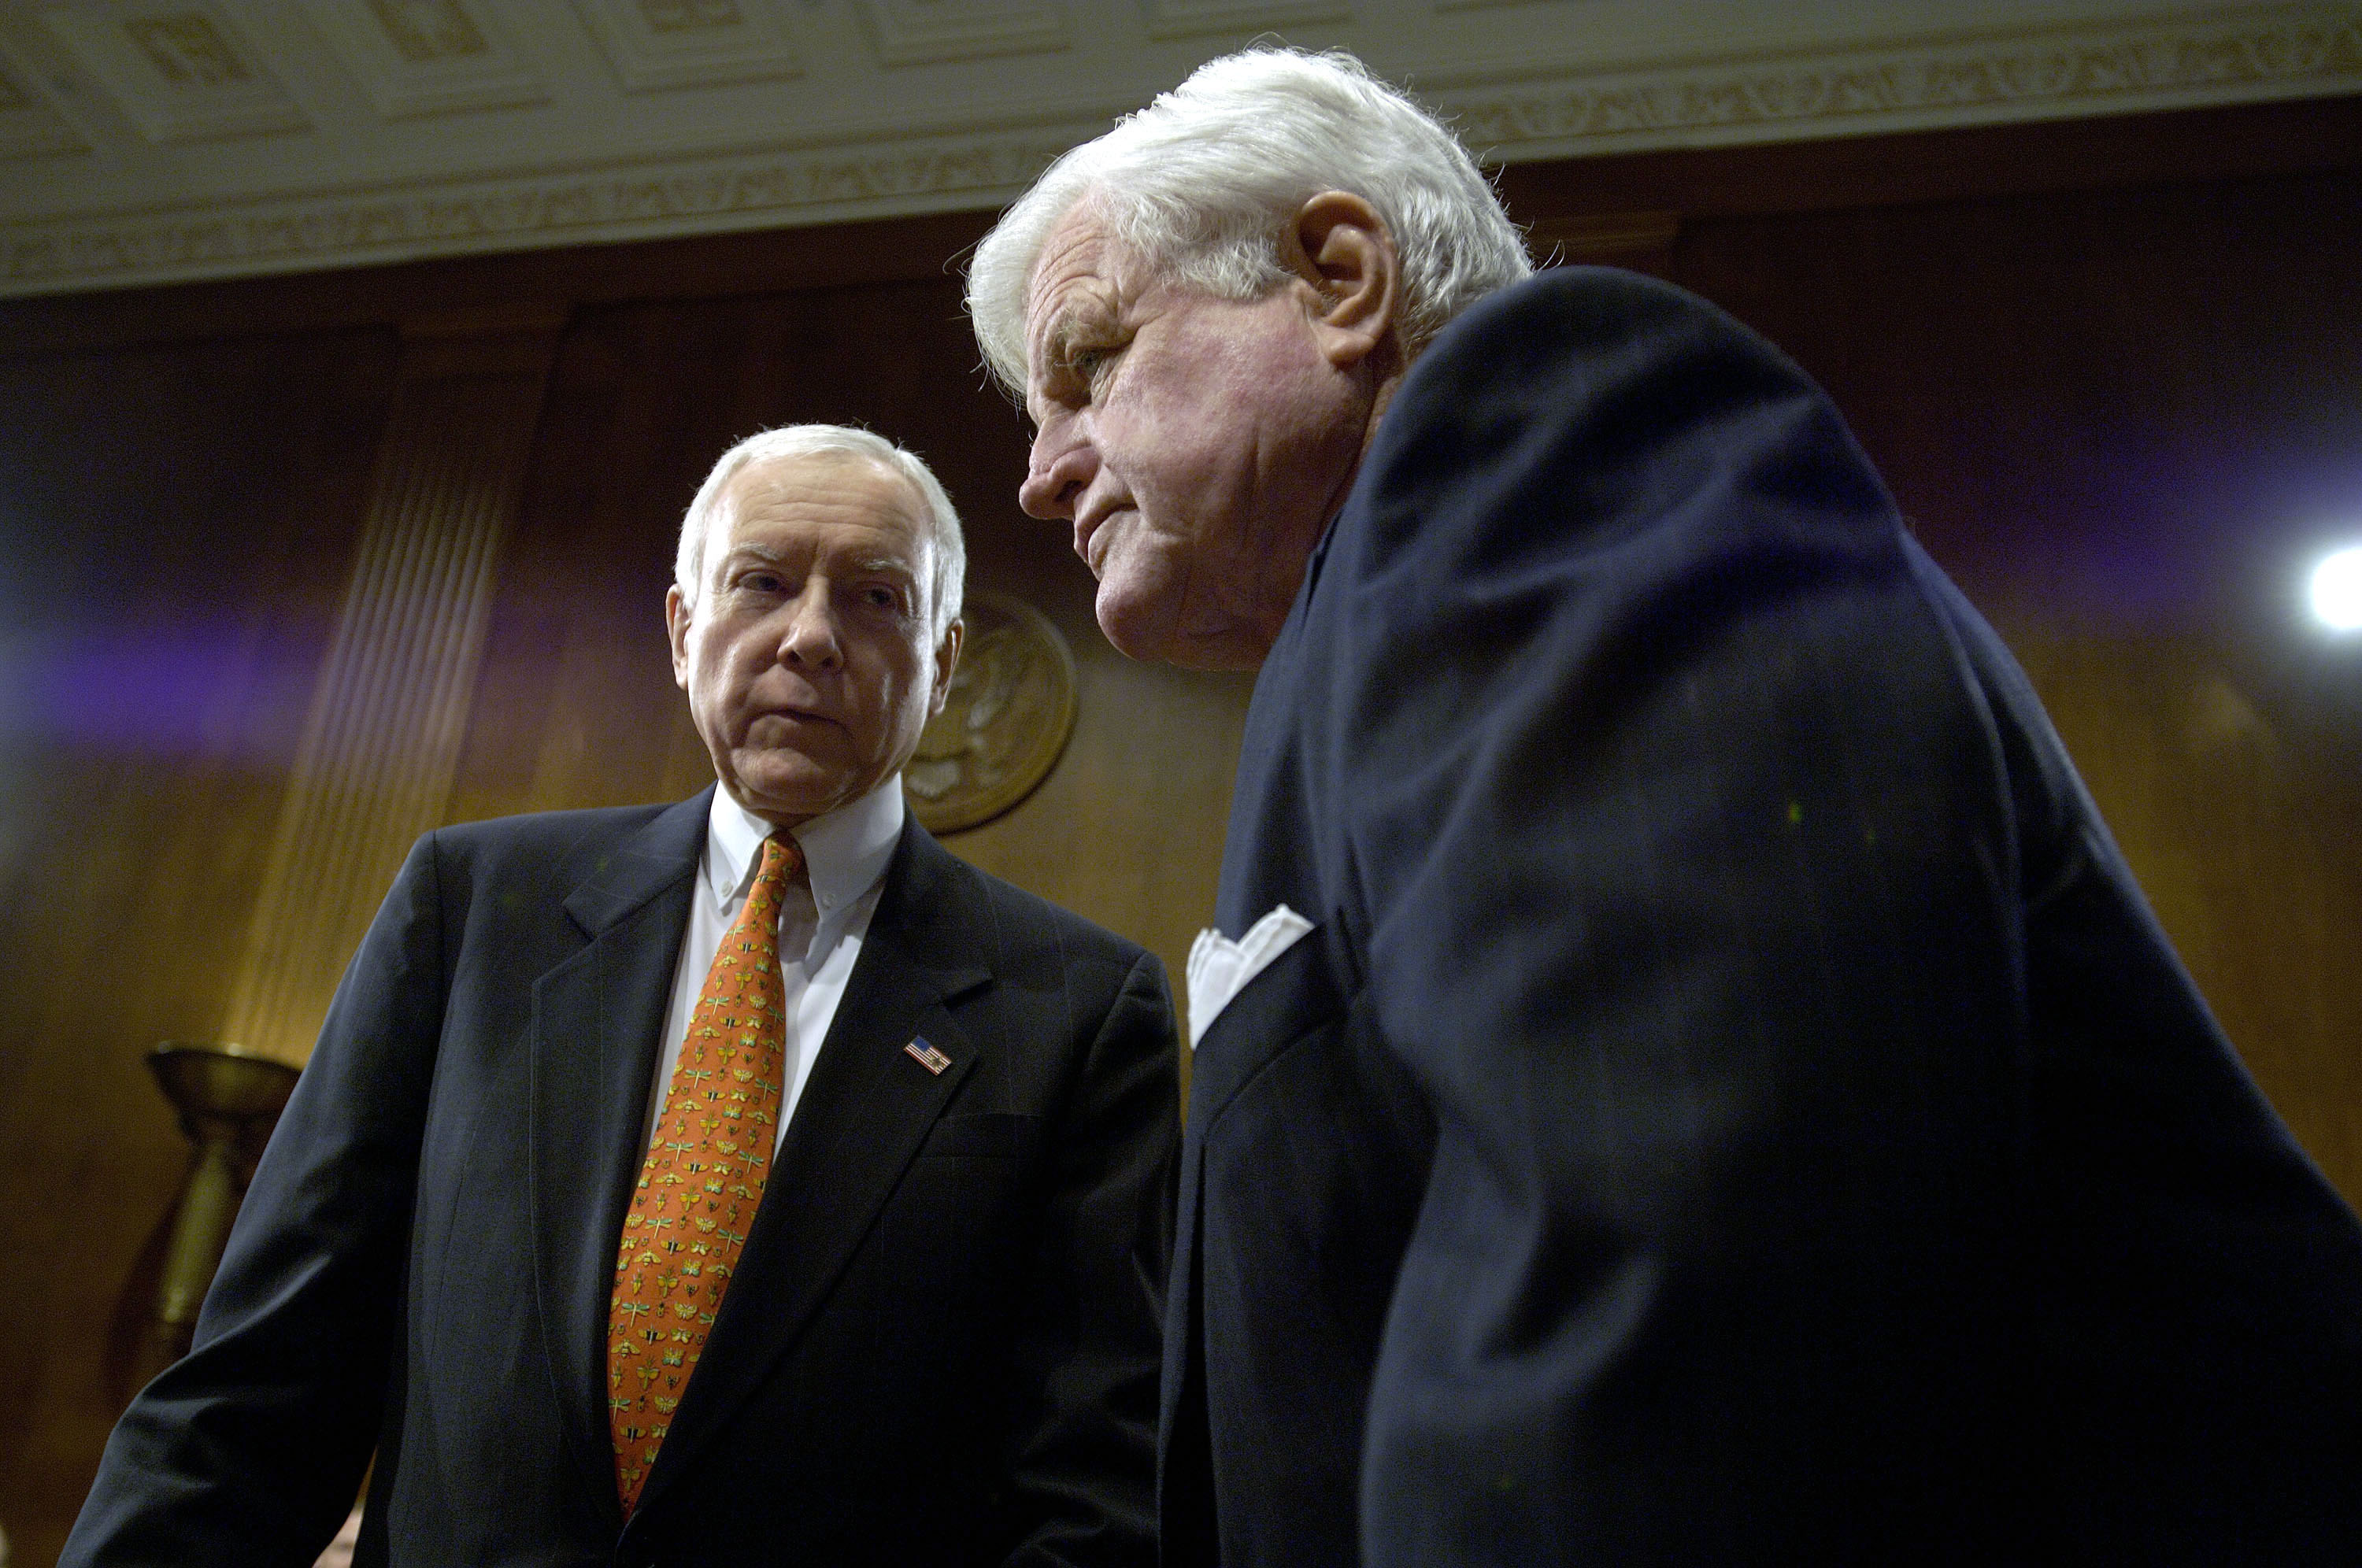 Senator Orrin G. Hatch (R-UT), left, and Senator Edward Kennedy (D-MA), confer prior to the Senate Judiciary Committee Markup to vote on the nomination of Judge Samuel Alito to the U.S. Supreme Court on Jan. 24, 2006 in Washington, D.C. (Chris Greenberg—Bloomberg/Getty Images)